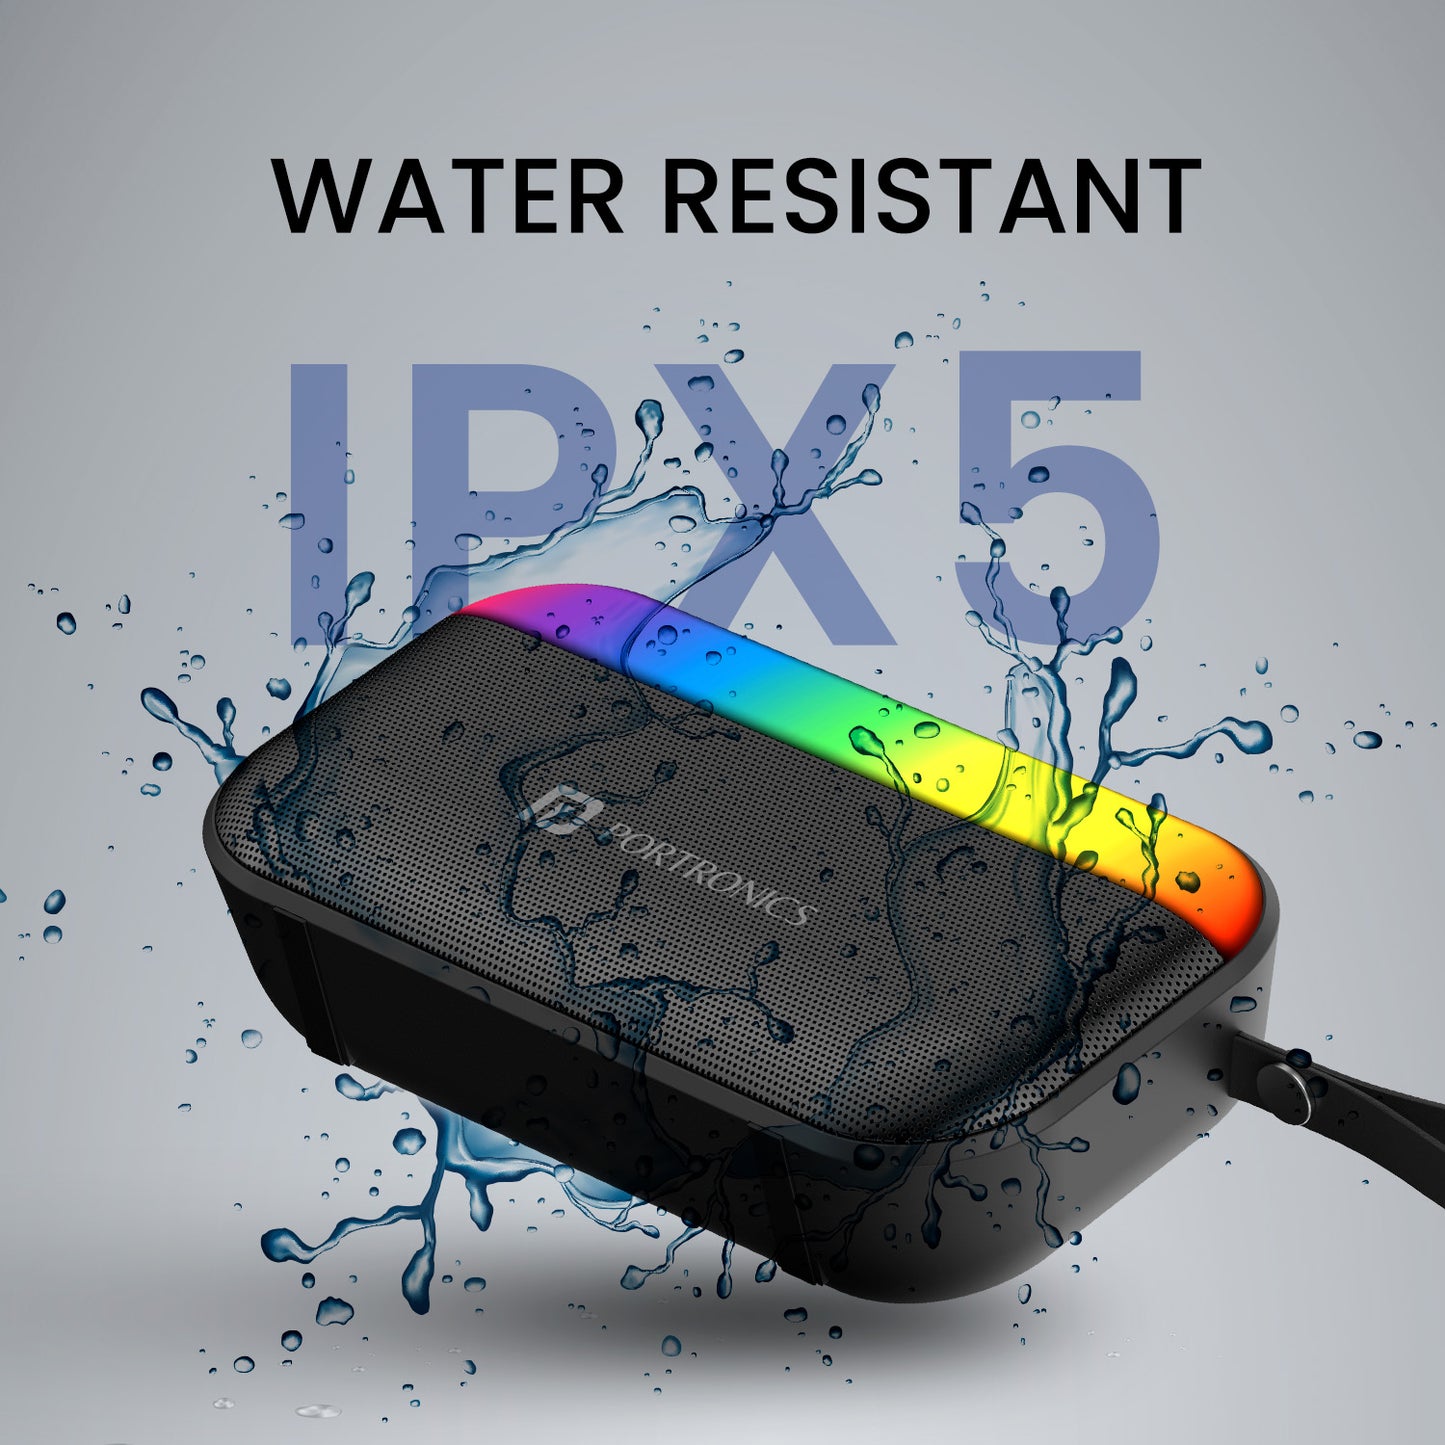 Portronics pulg 2 8w portable wireless buletooth speaker comes with ipx5 water resistance. Black